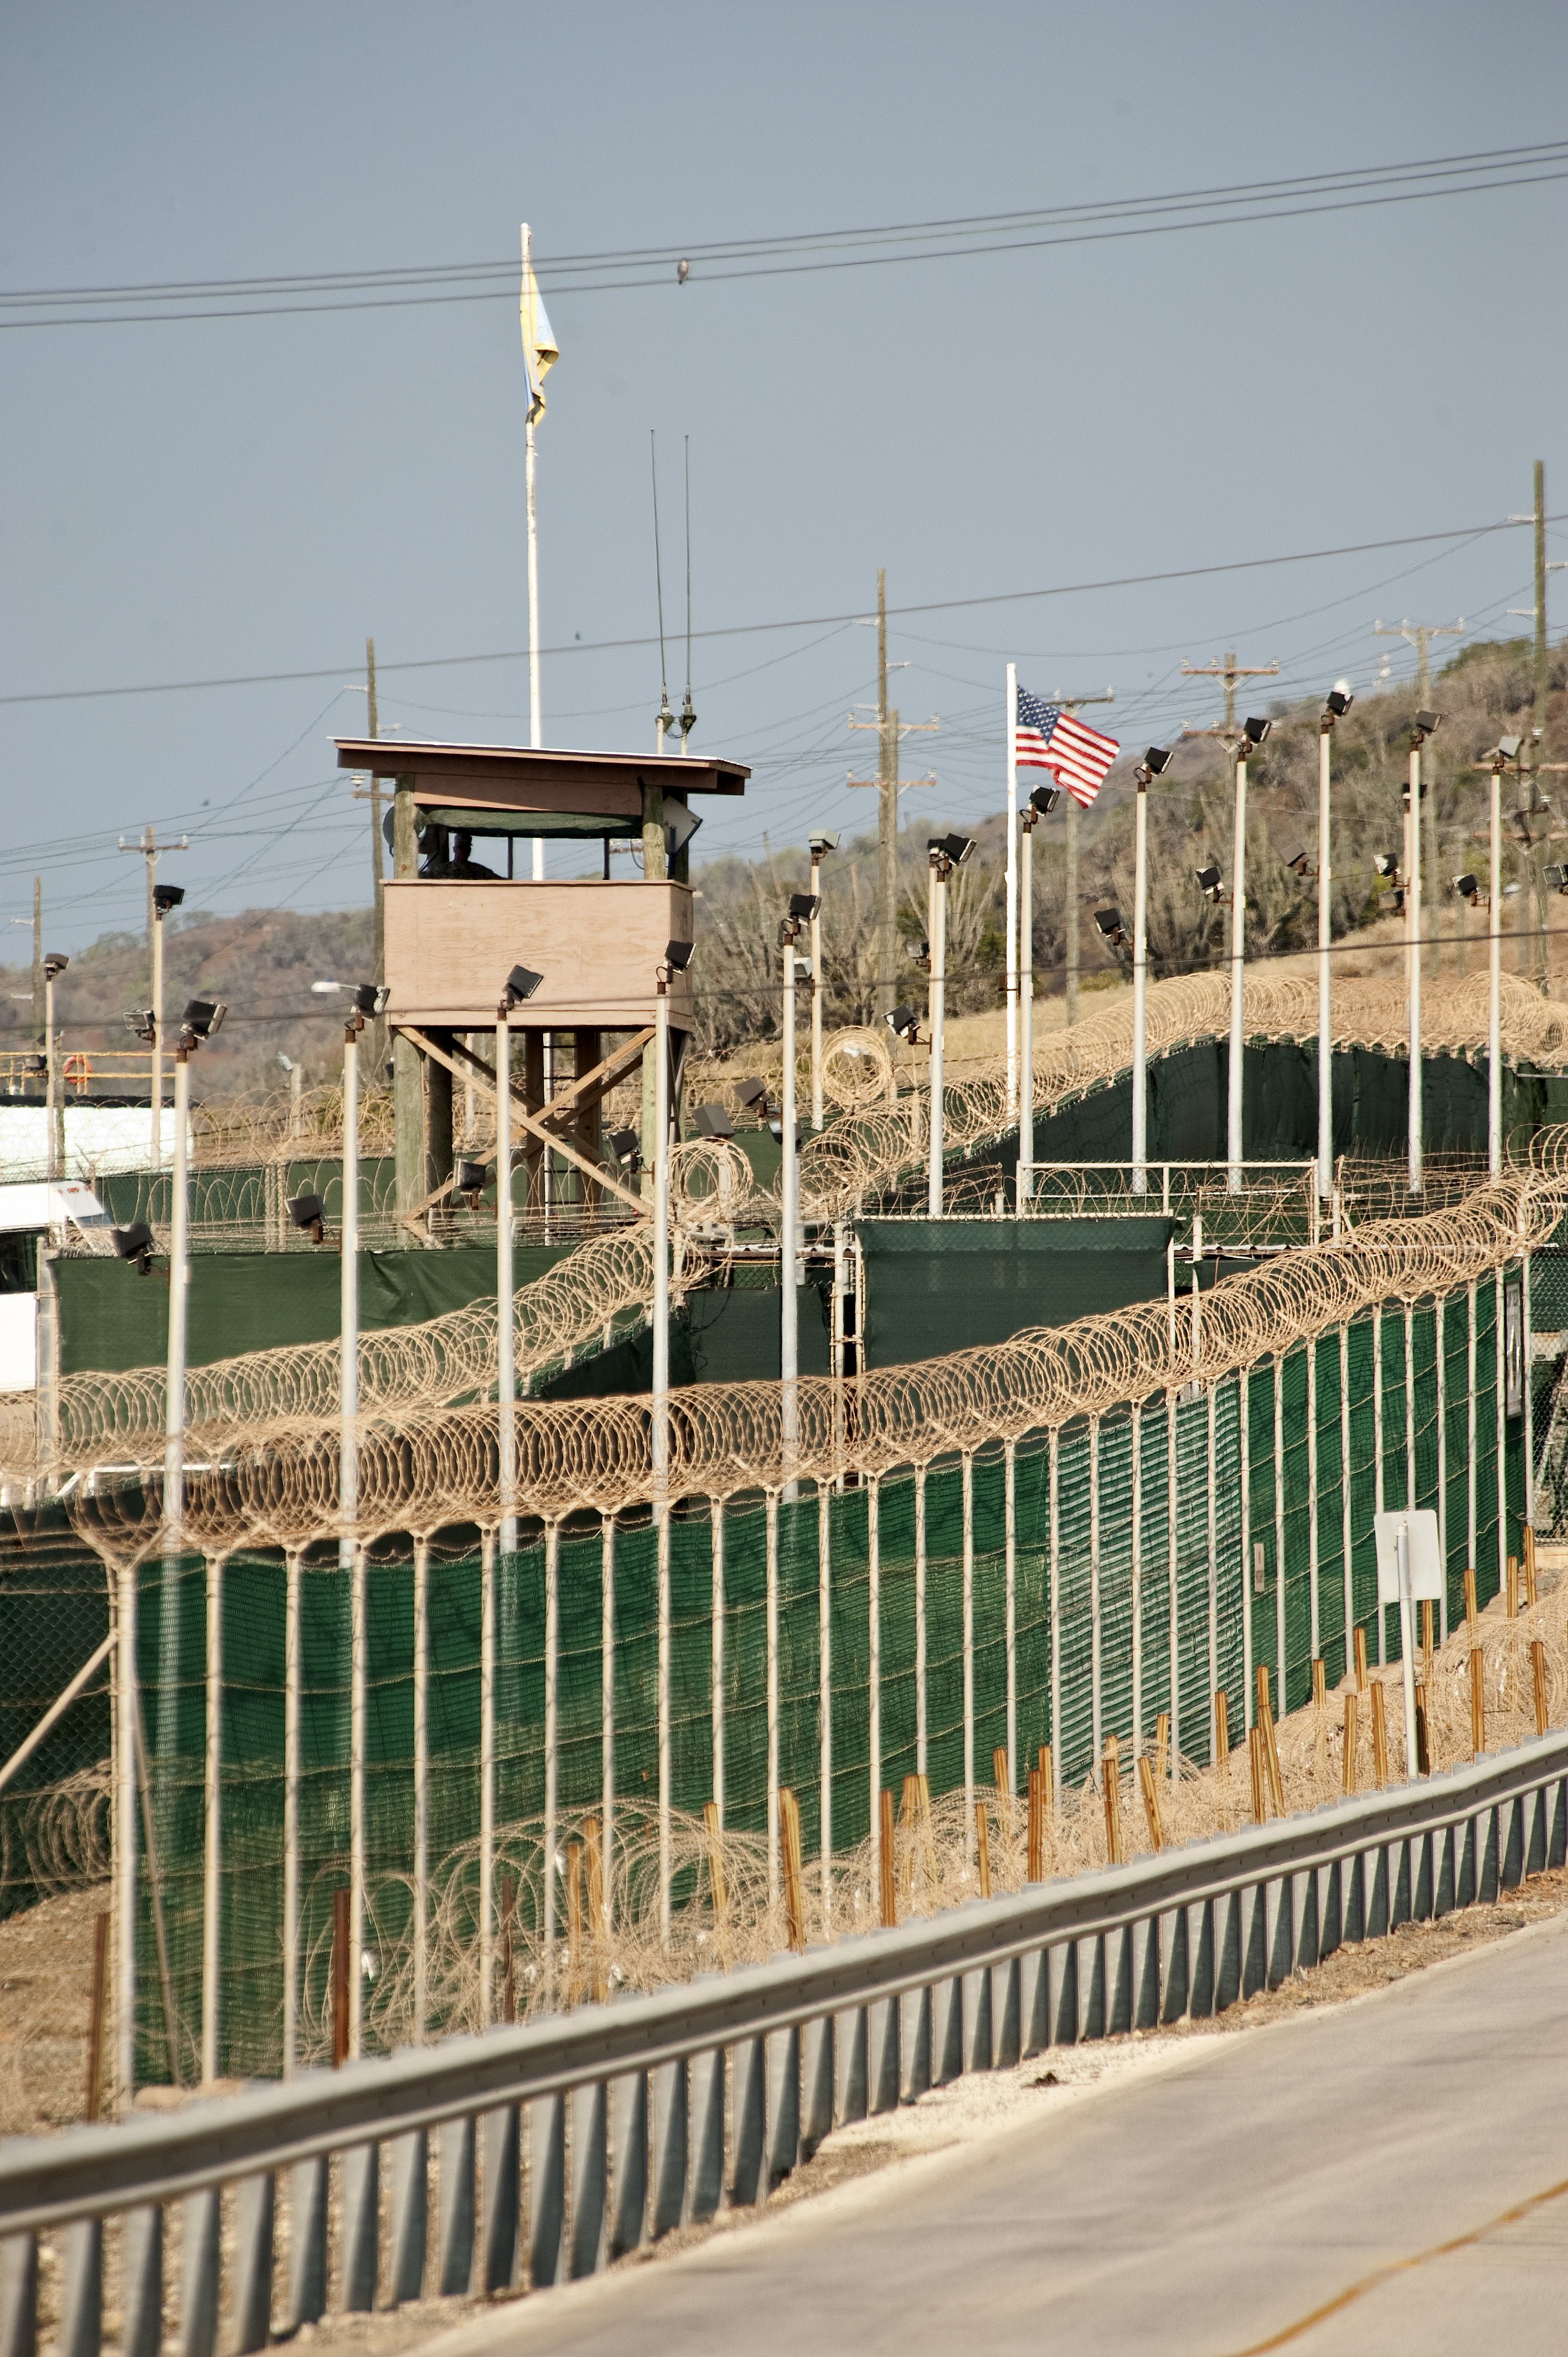 Camp Delta and Echo at the Joint Task Force detention centre at Guantanamo Bay